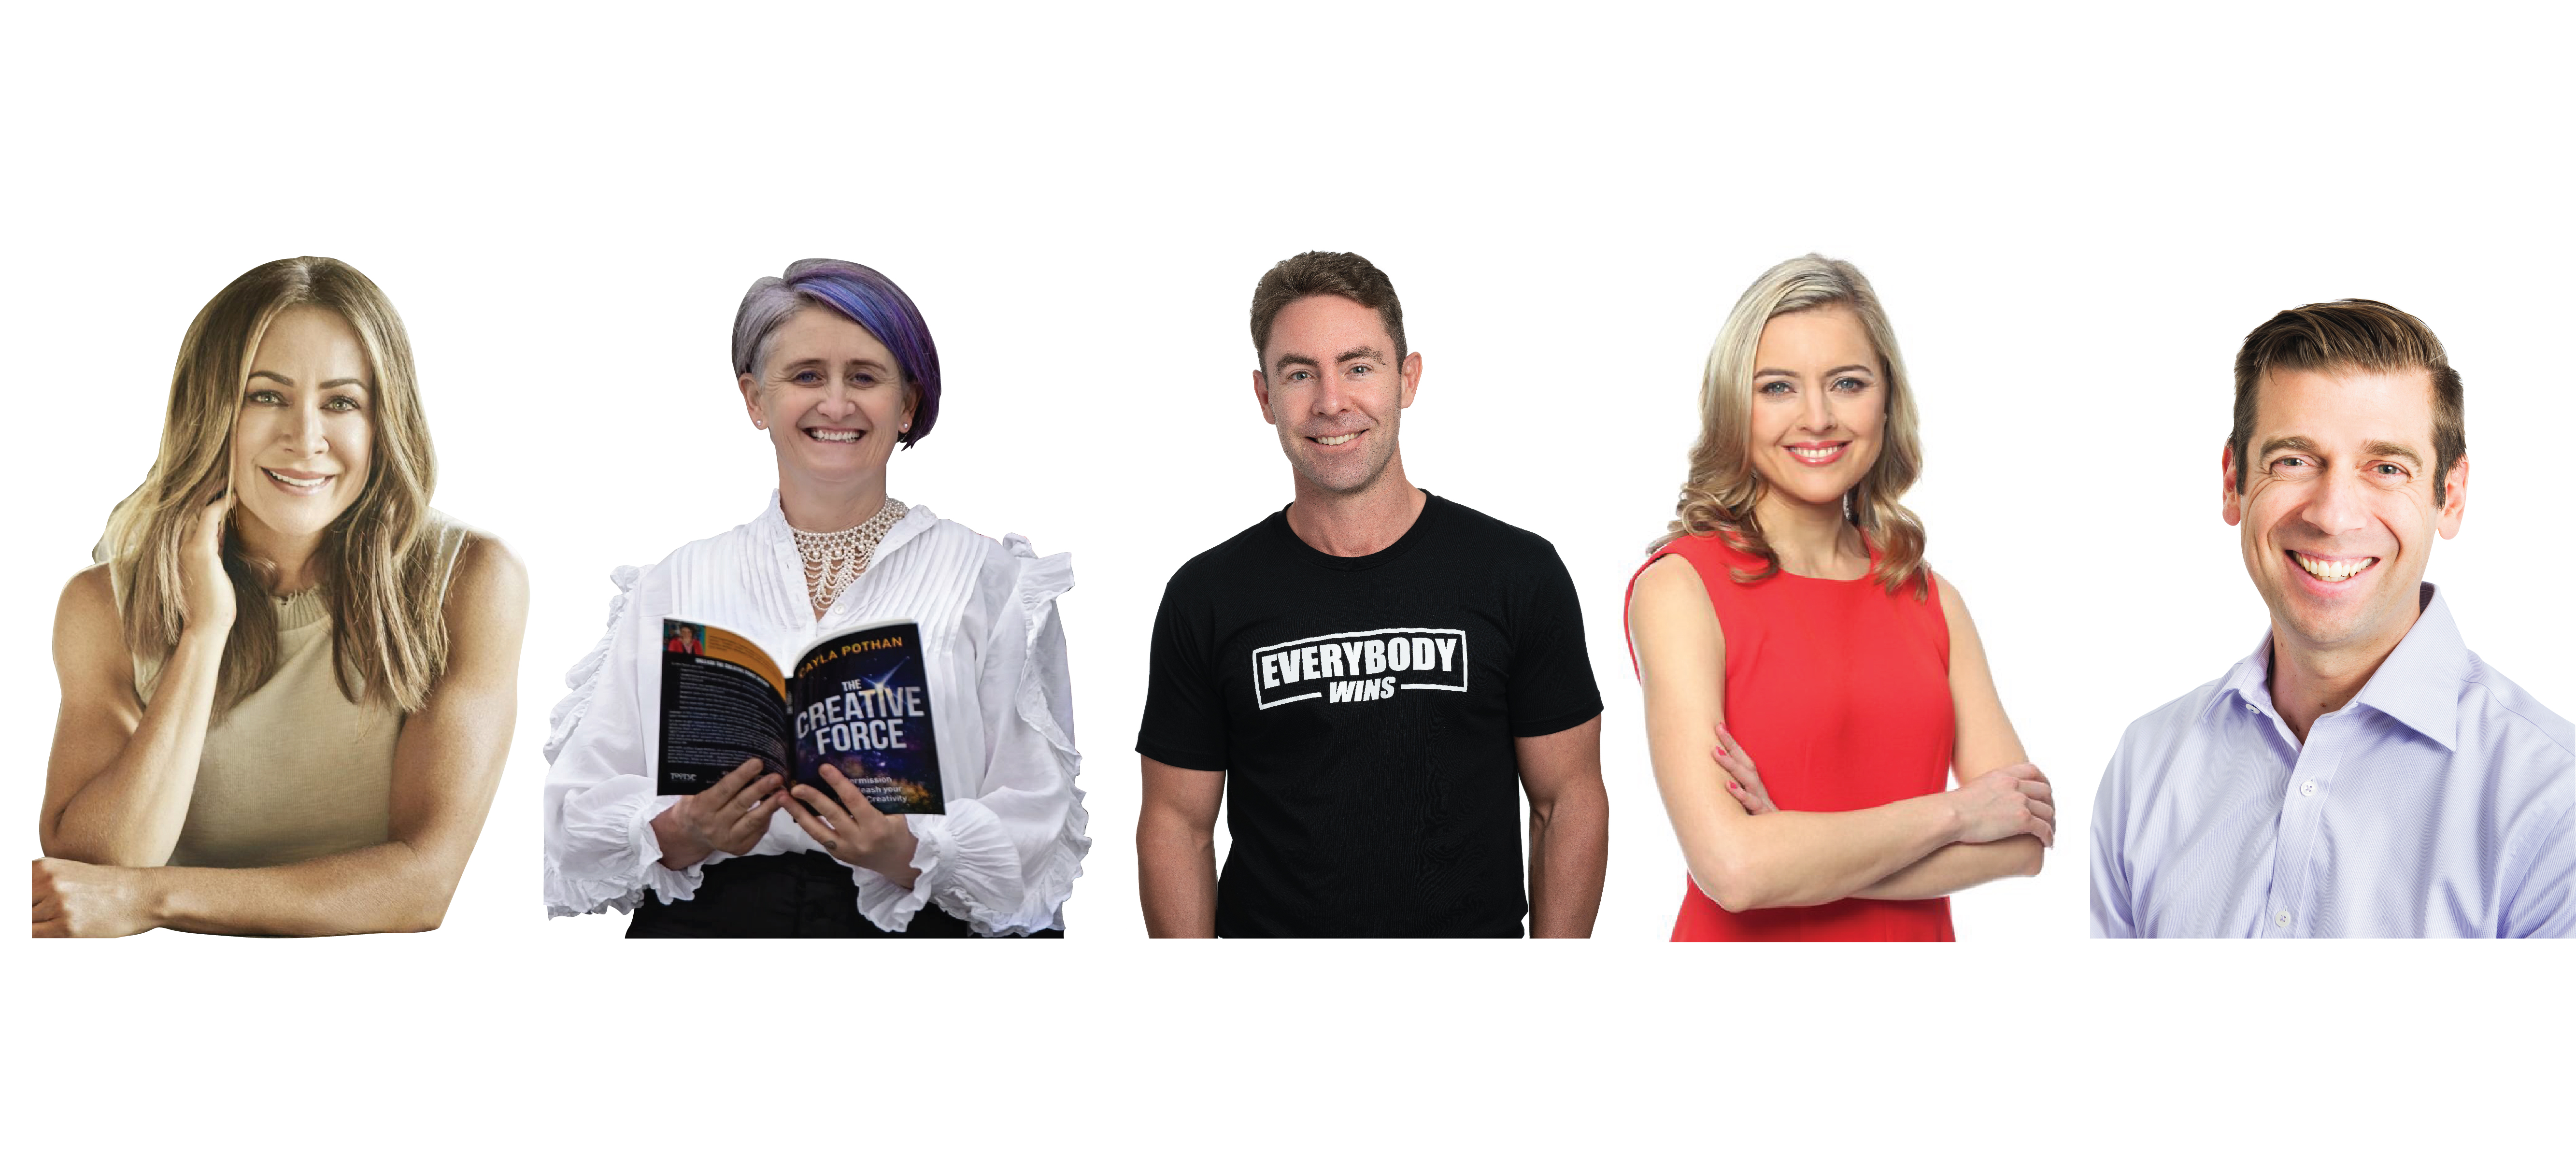 Four headshots of people from left to right Michelle Bridges, Cayla Pothan, Dave Barrie, Gemma Acton & Dr Justin Coulson